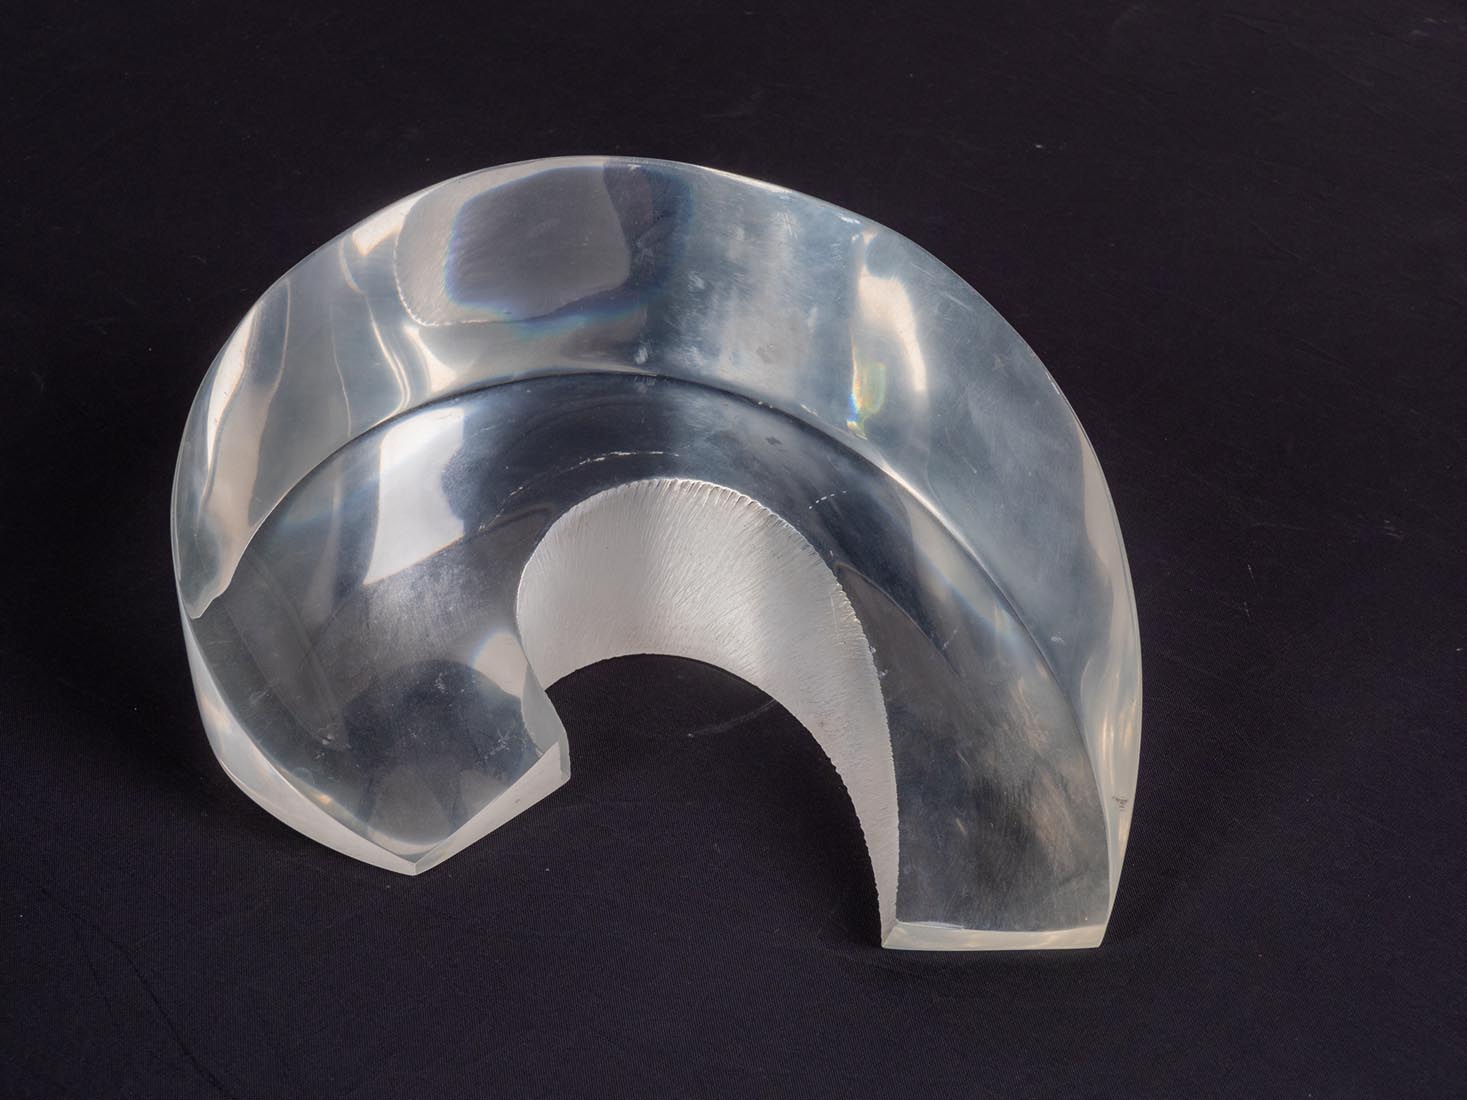 Lucite Crescent-shaped forms by Marjorie White Williams